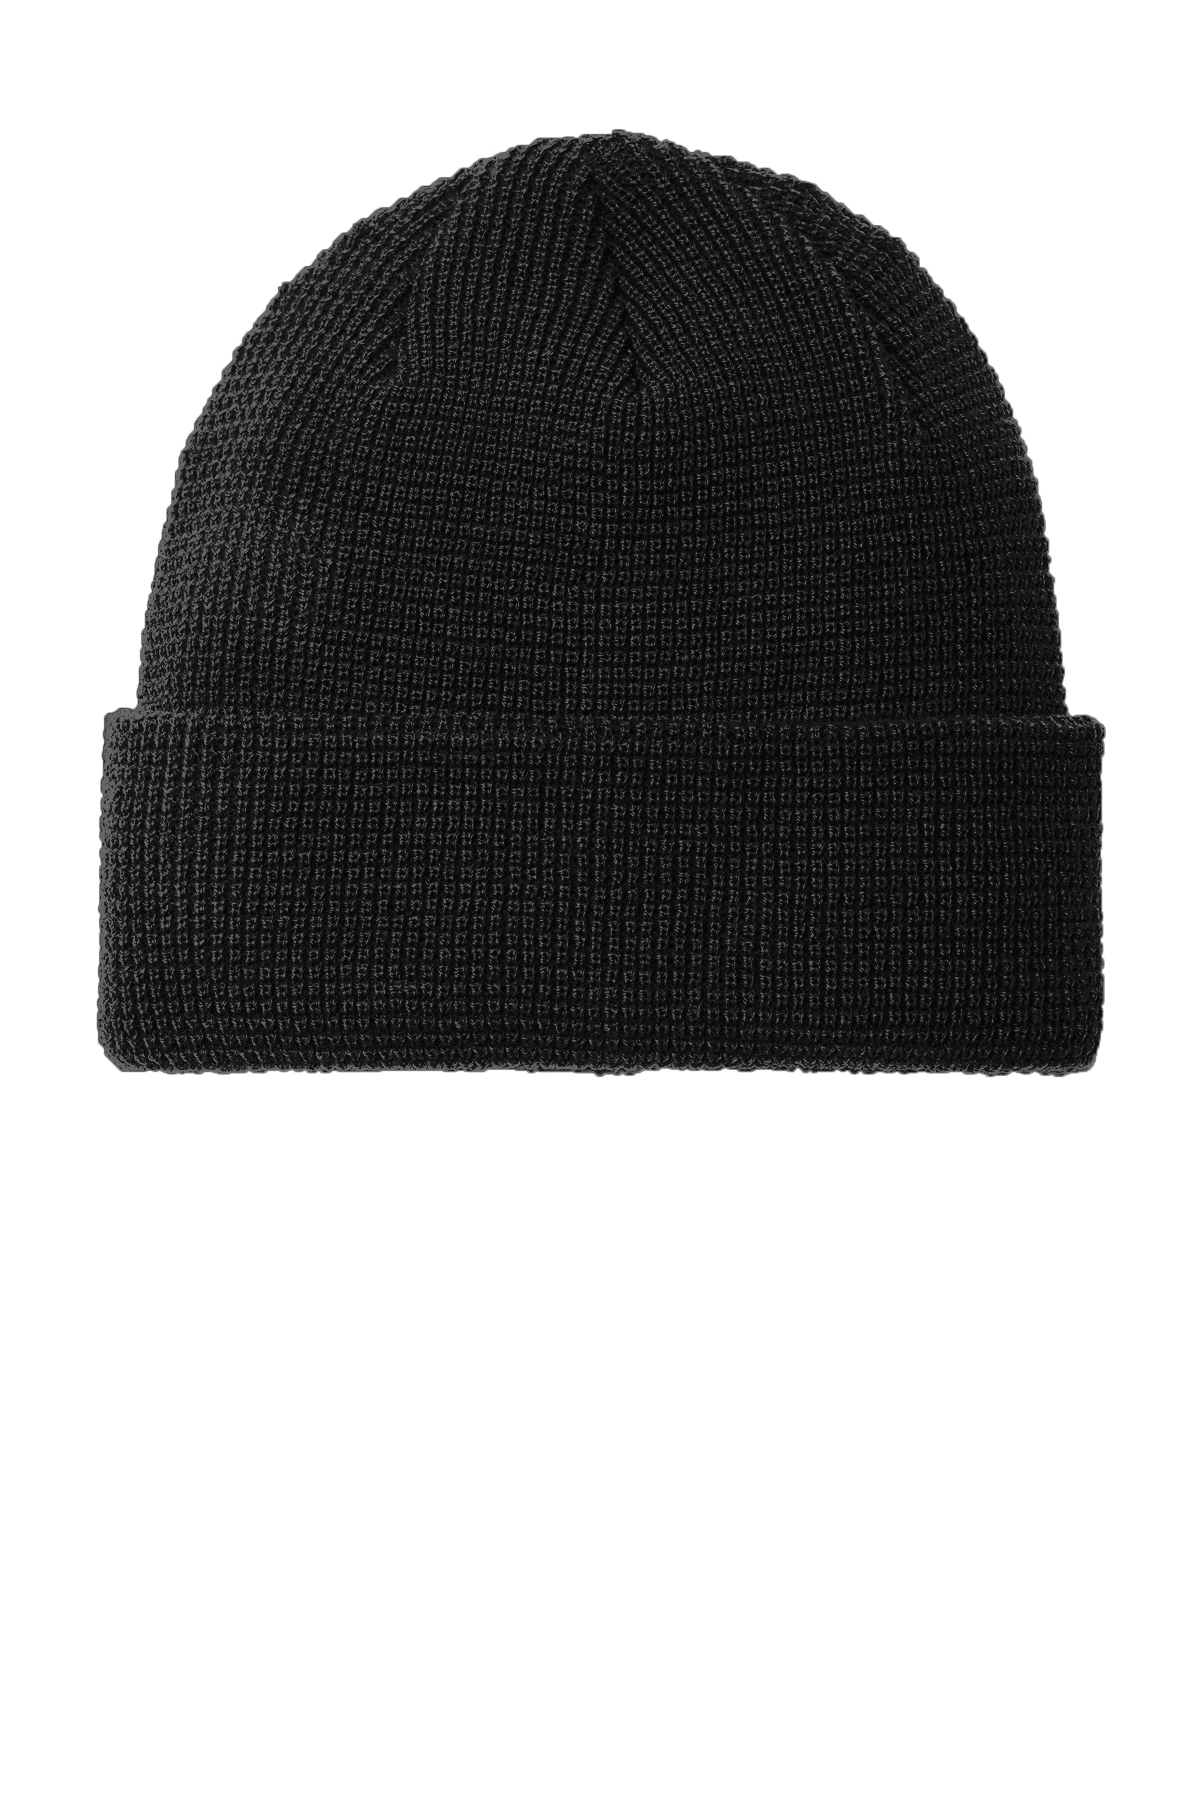 Thermal Beanie Product Authority Cuffed Knit Port Port | Authority |